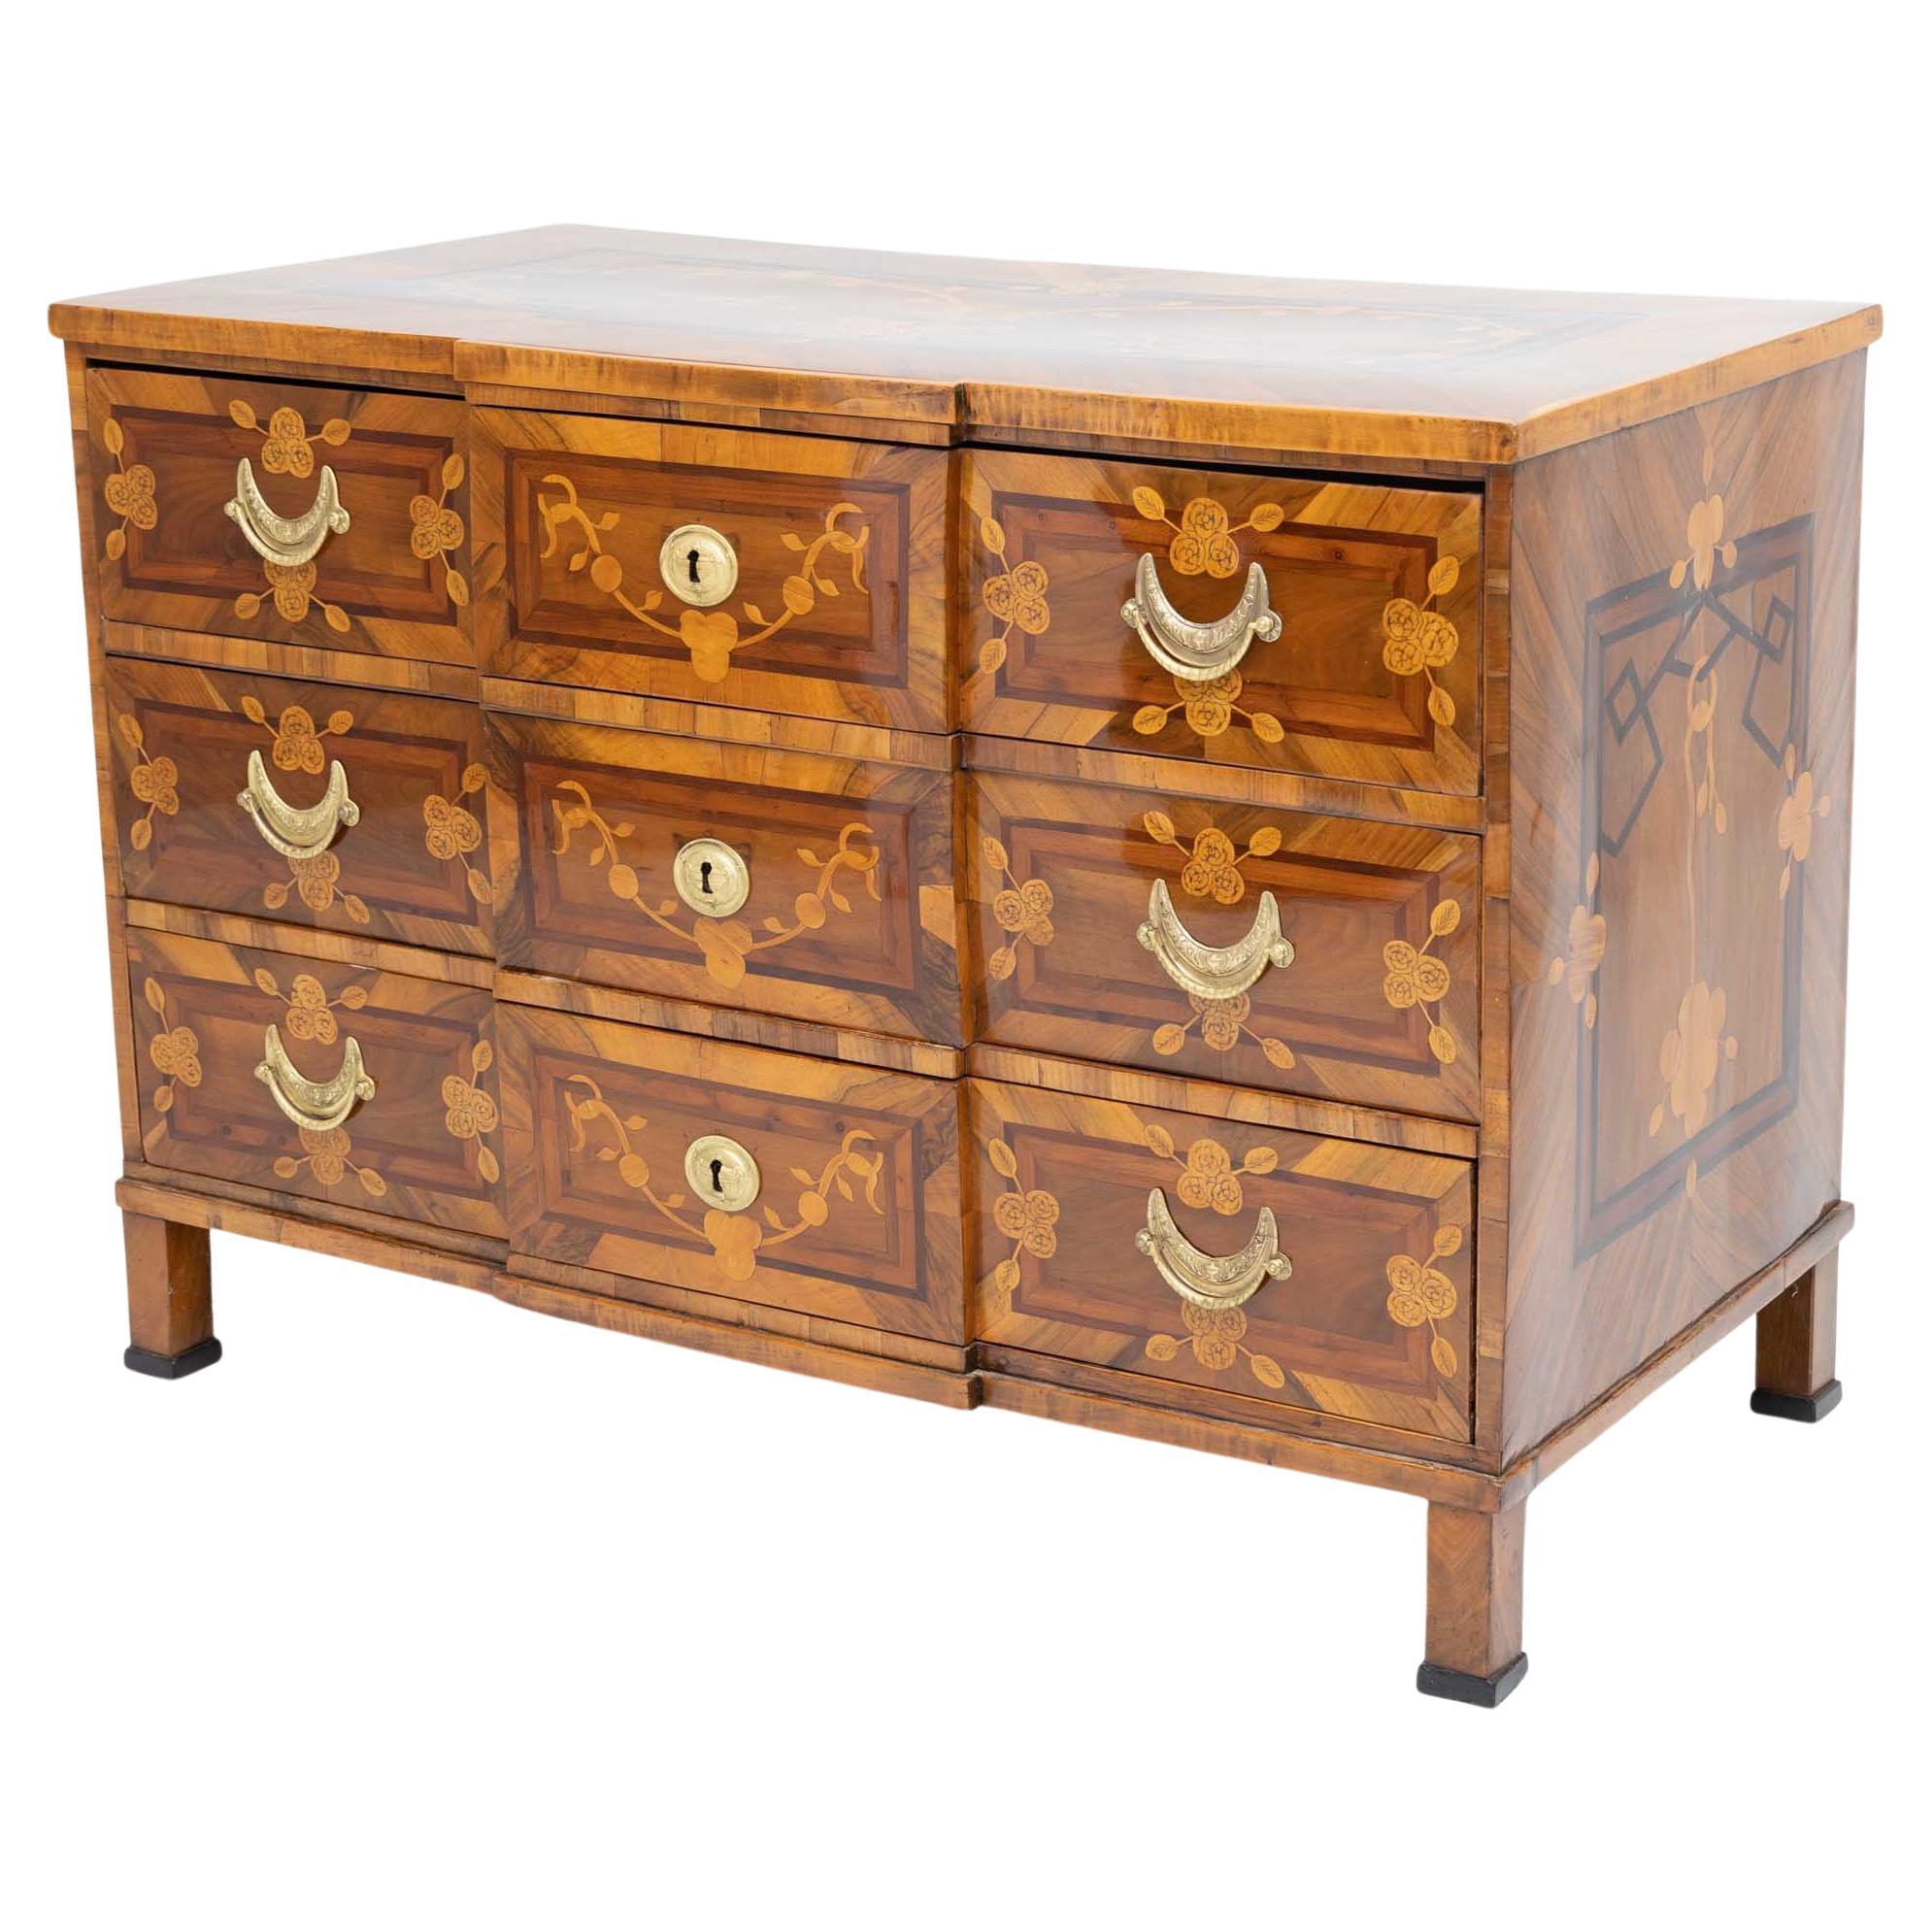 Louis Seize Marquetry Chest of Drawers, Walnut veneered, Late 18th Century